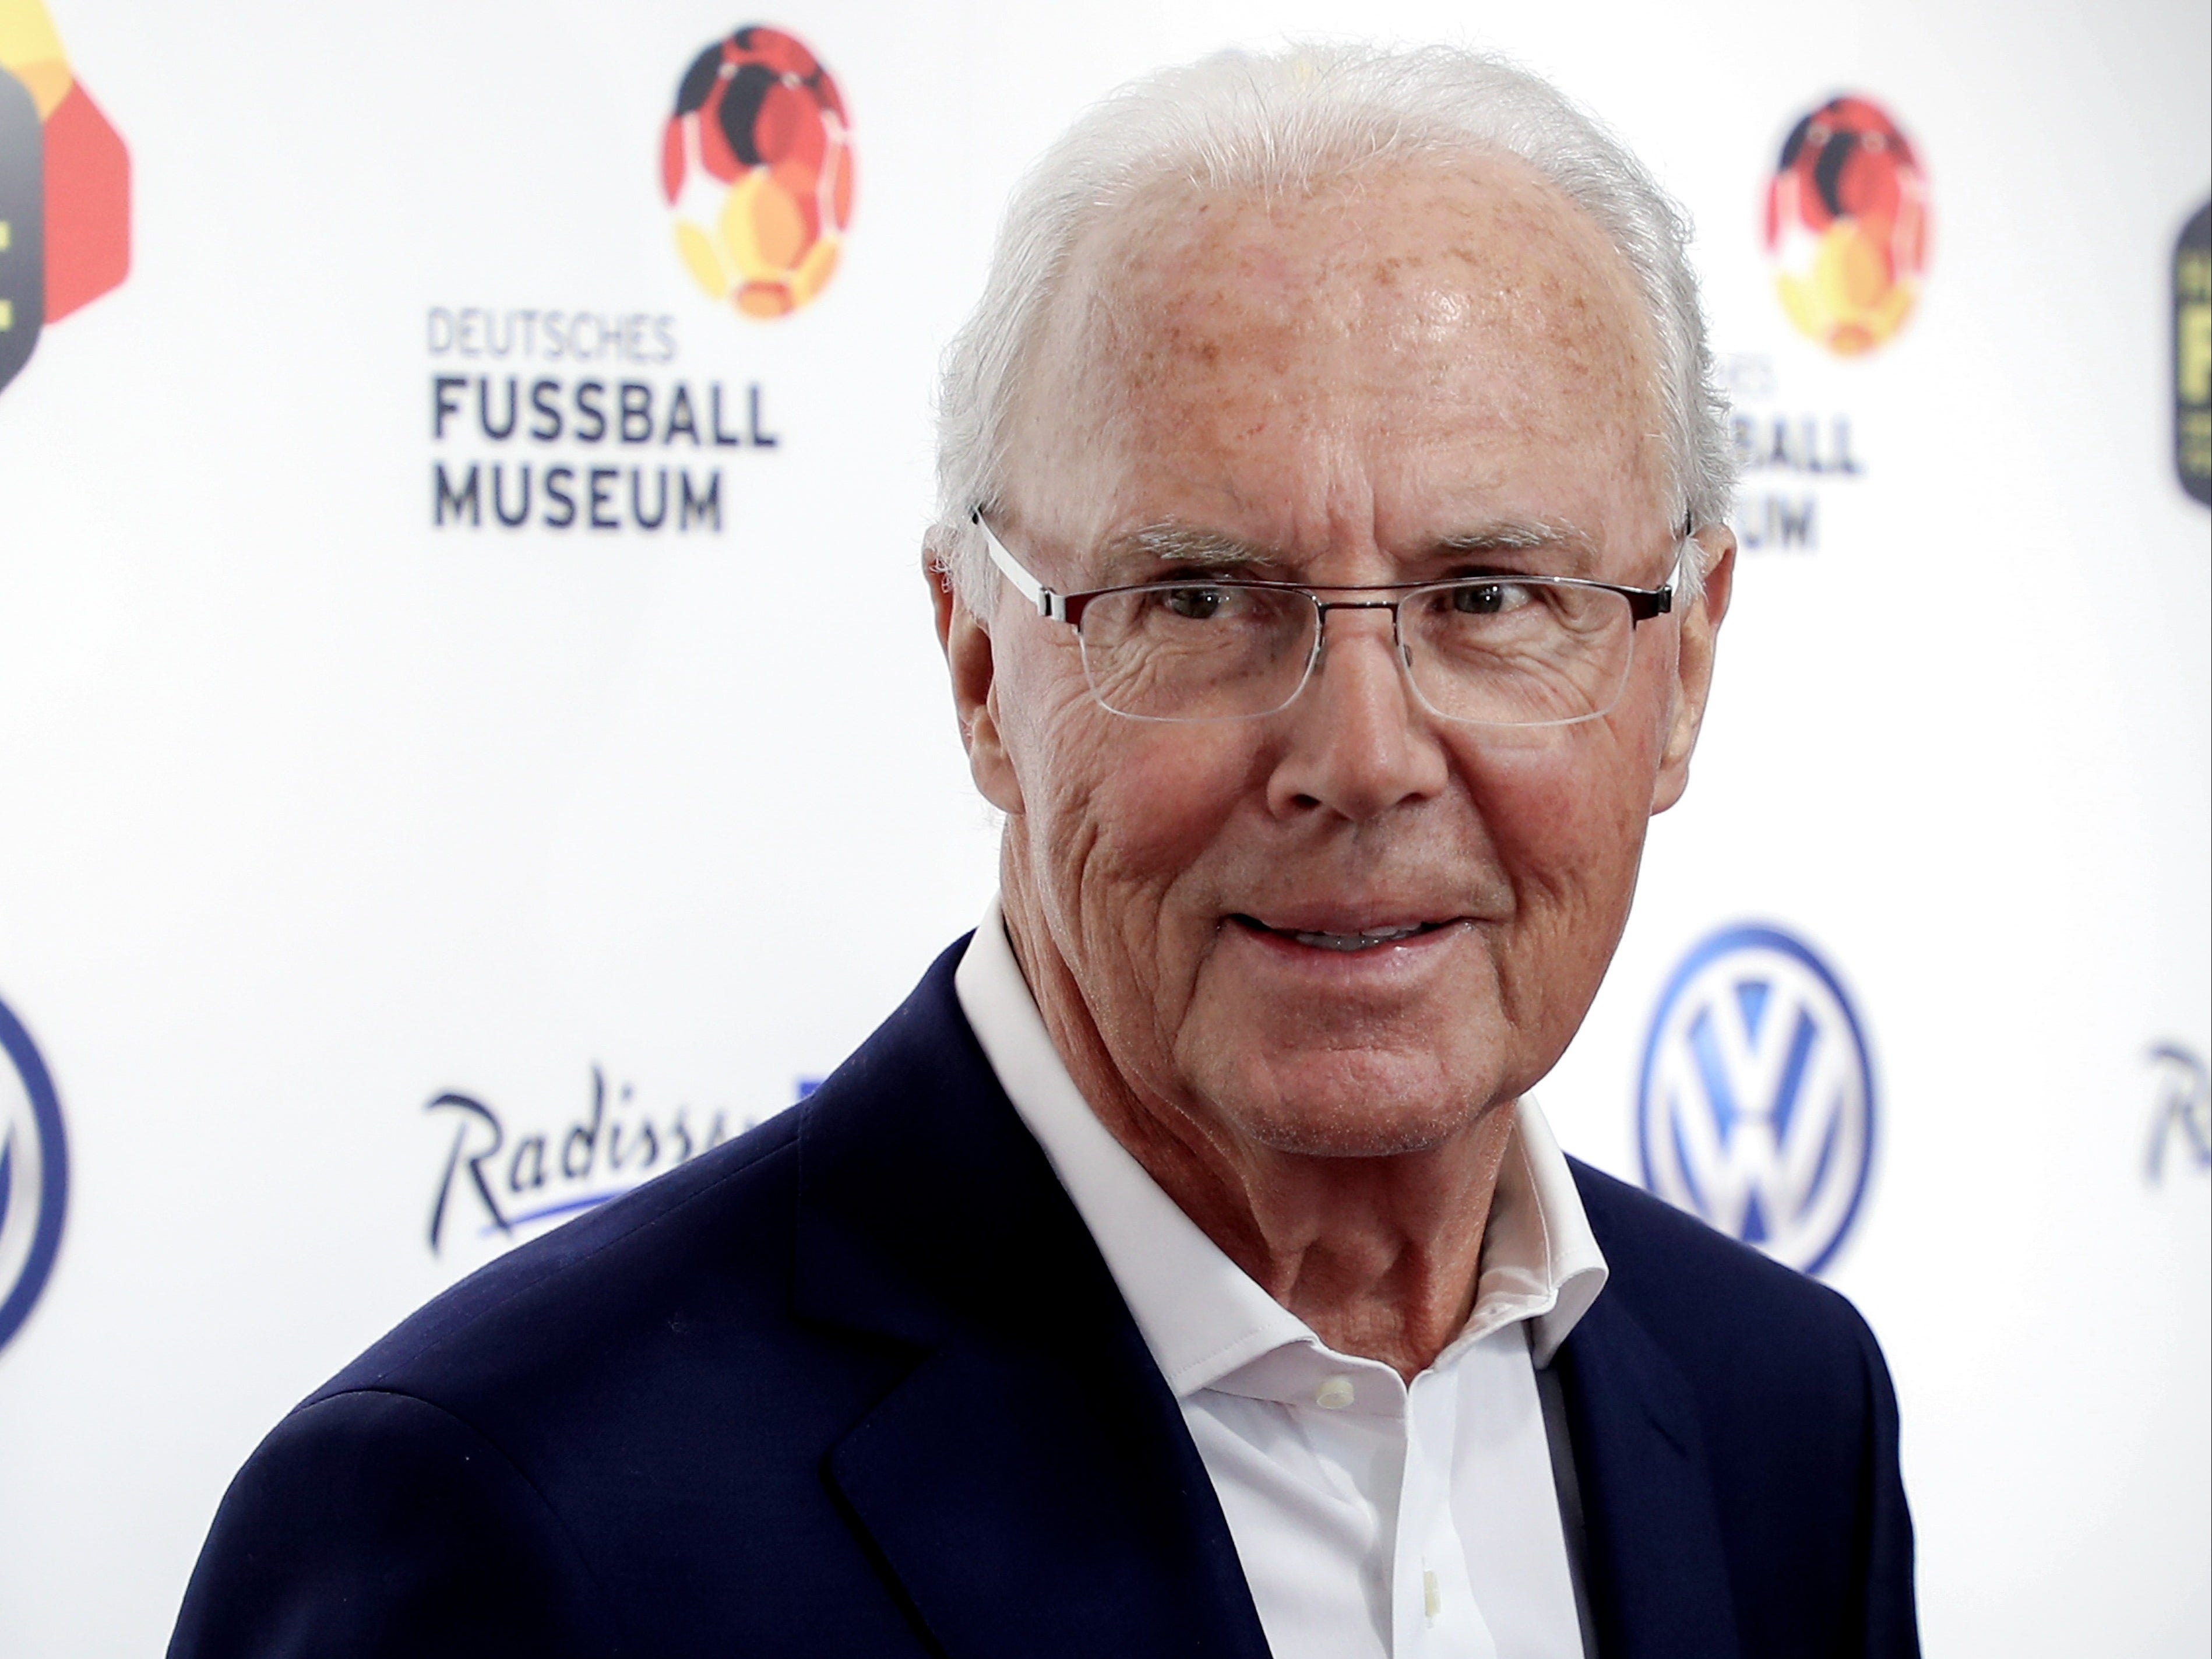 Franz Beckenbauer had a complicated legacy off the pitch, as well as a marvellous career on it